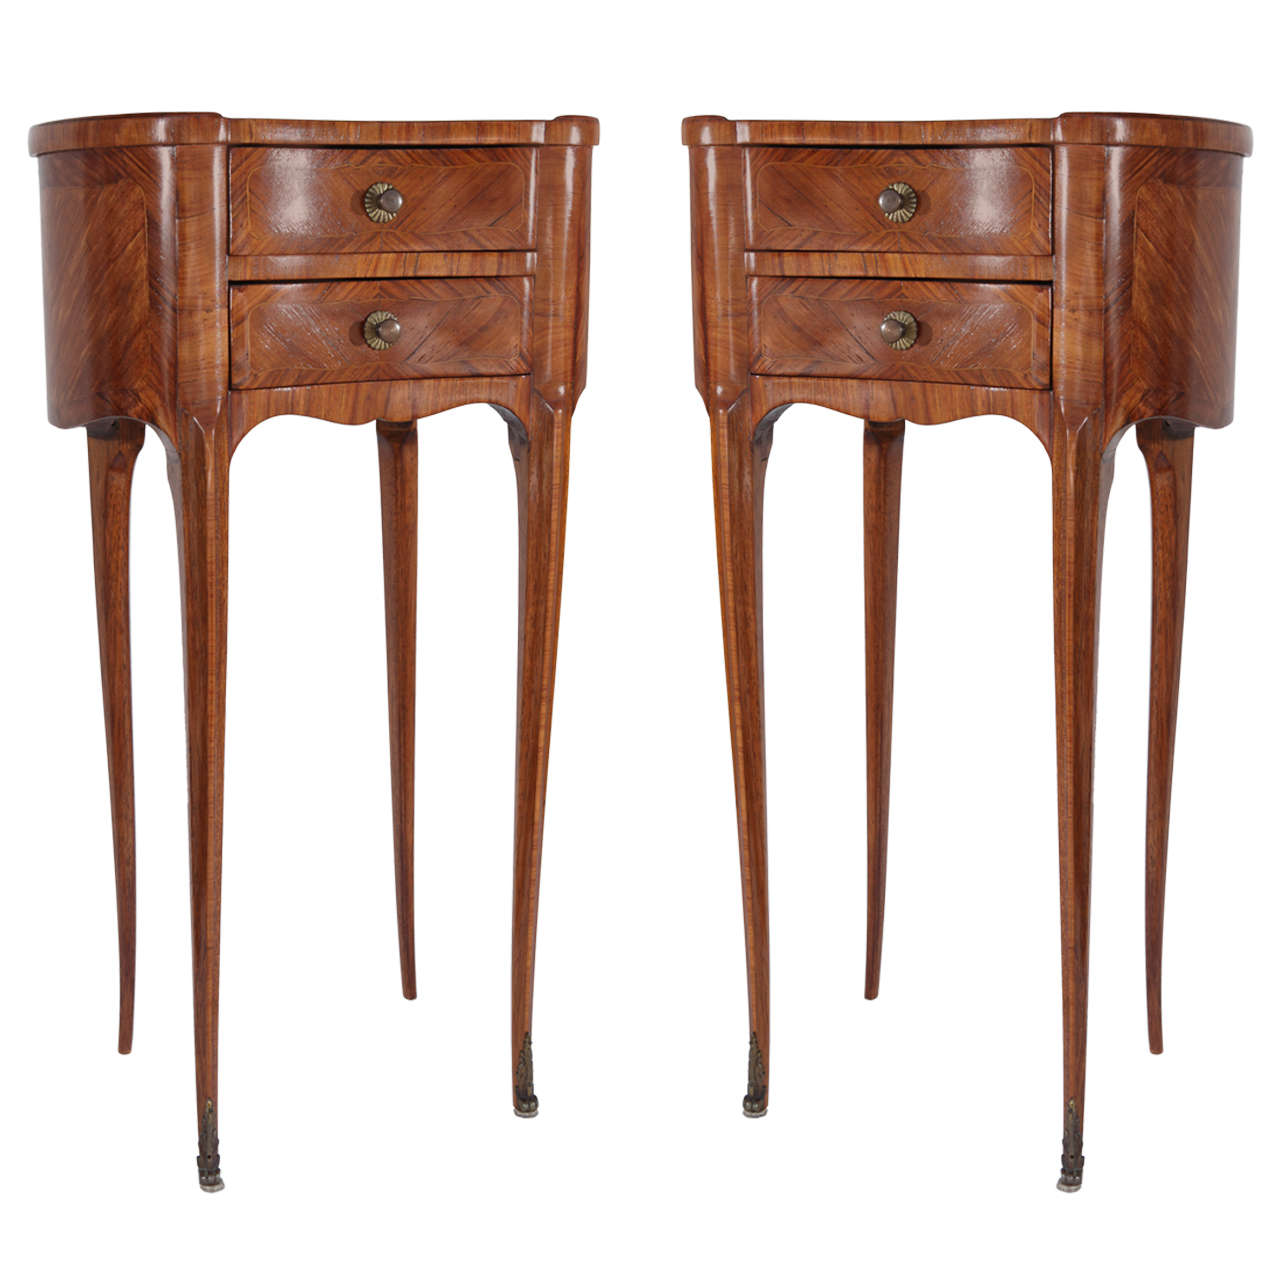 Pair of 1900s French Kidney Shaped Walnut End Tables